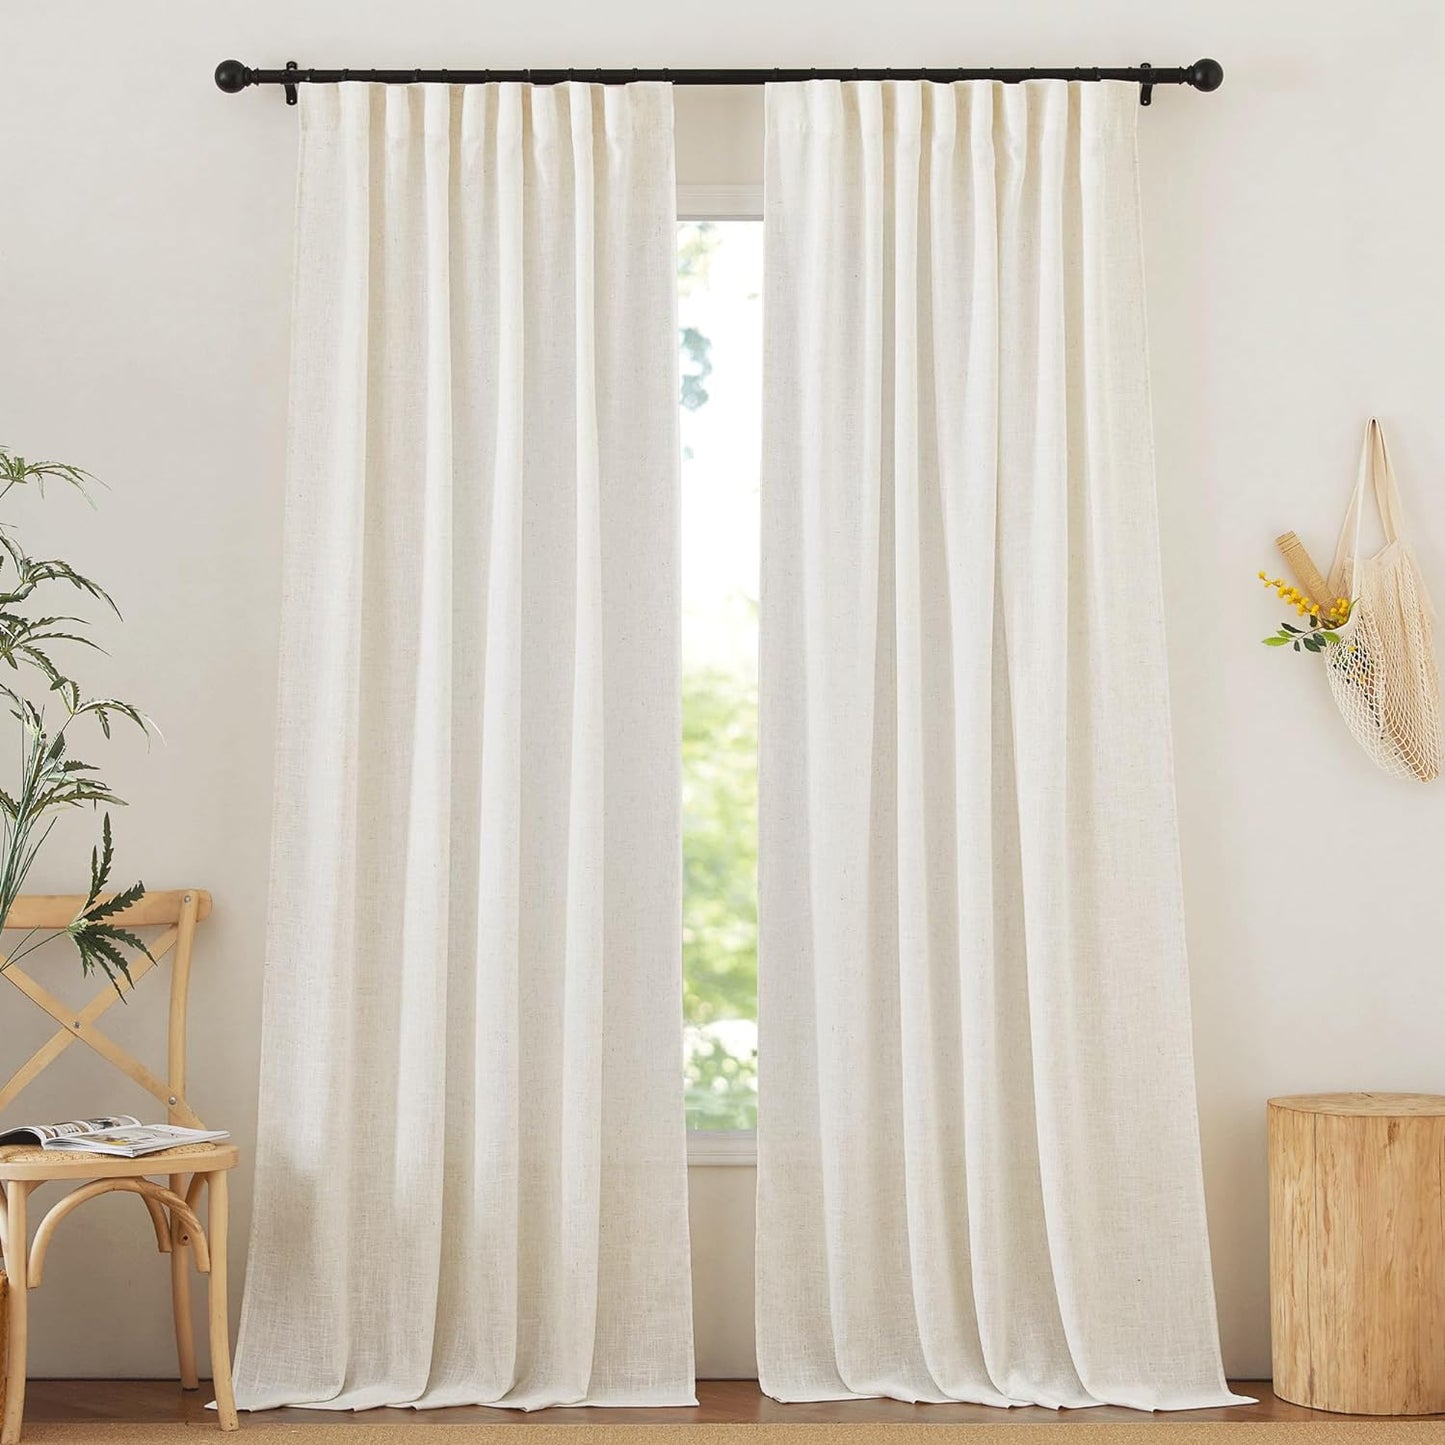 NICETOWN White Curtains Sheer - Semi Sheer Window Covering, Light & Airy Privacy Rod Pocket Back Tab Pinche Pleated Drapes for Bedroom Living Room Patio Glass Door, 52 X 63 Inches Long, Set of 2  NICETOWN Linen W52 X L84 